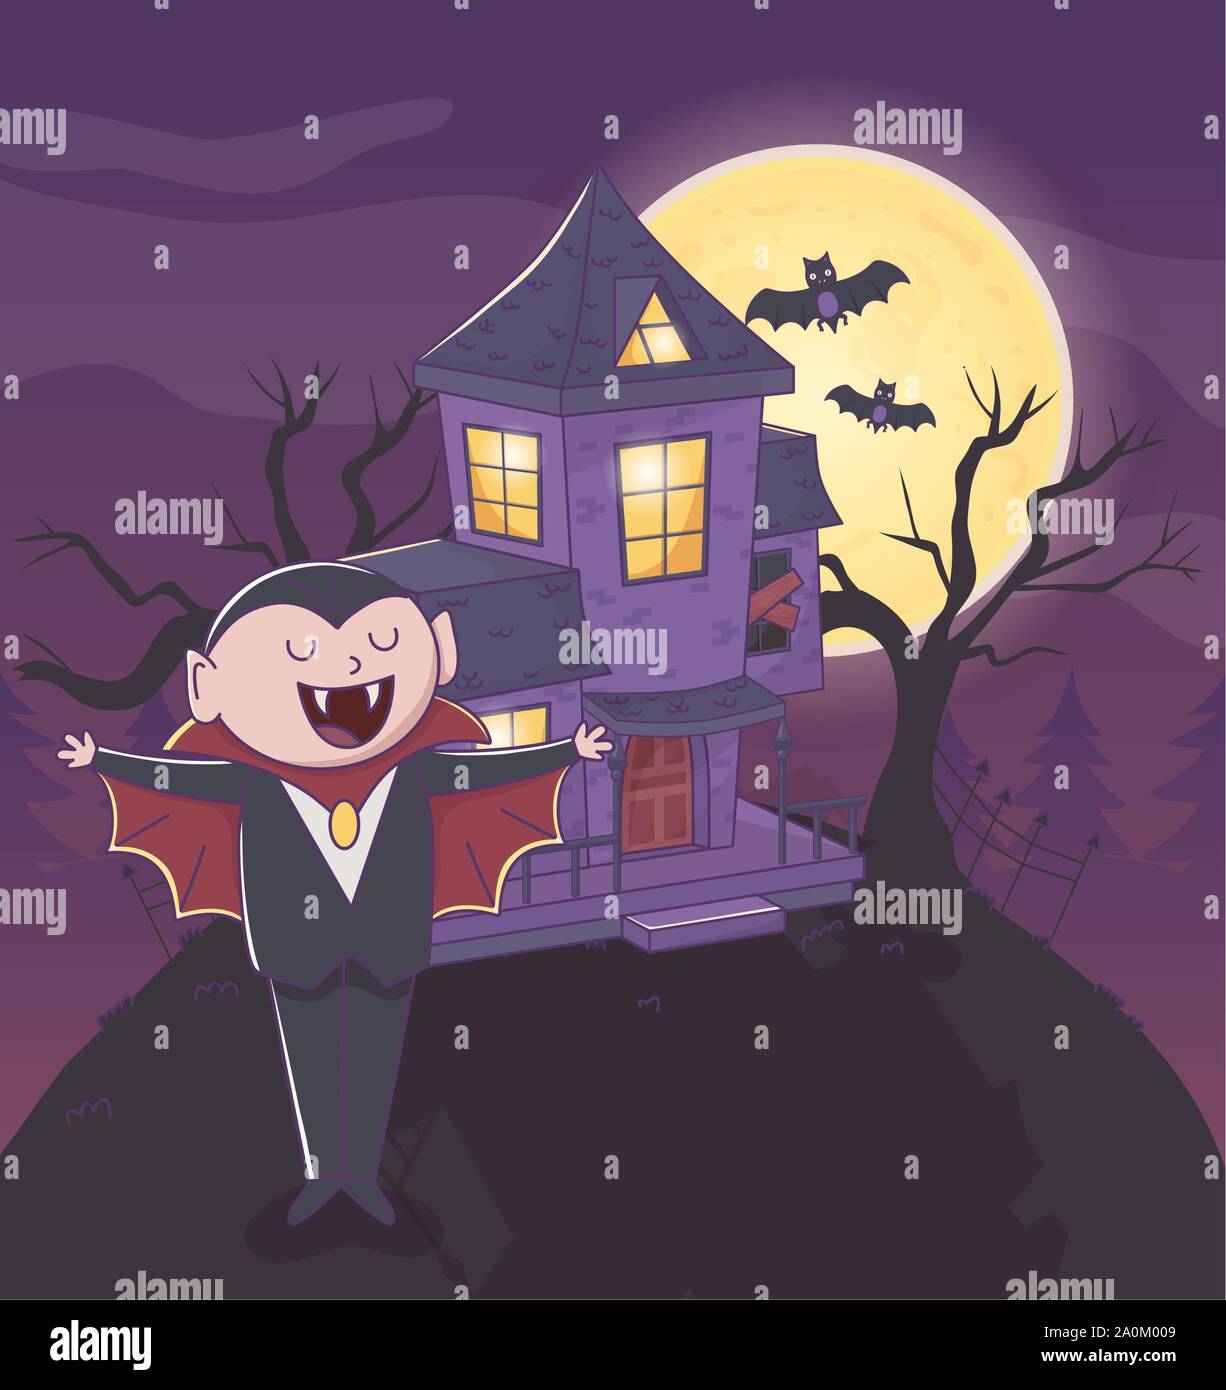 count dracula bats and house in the night halloween vector illustration Stock Vector